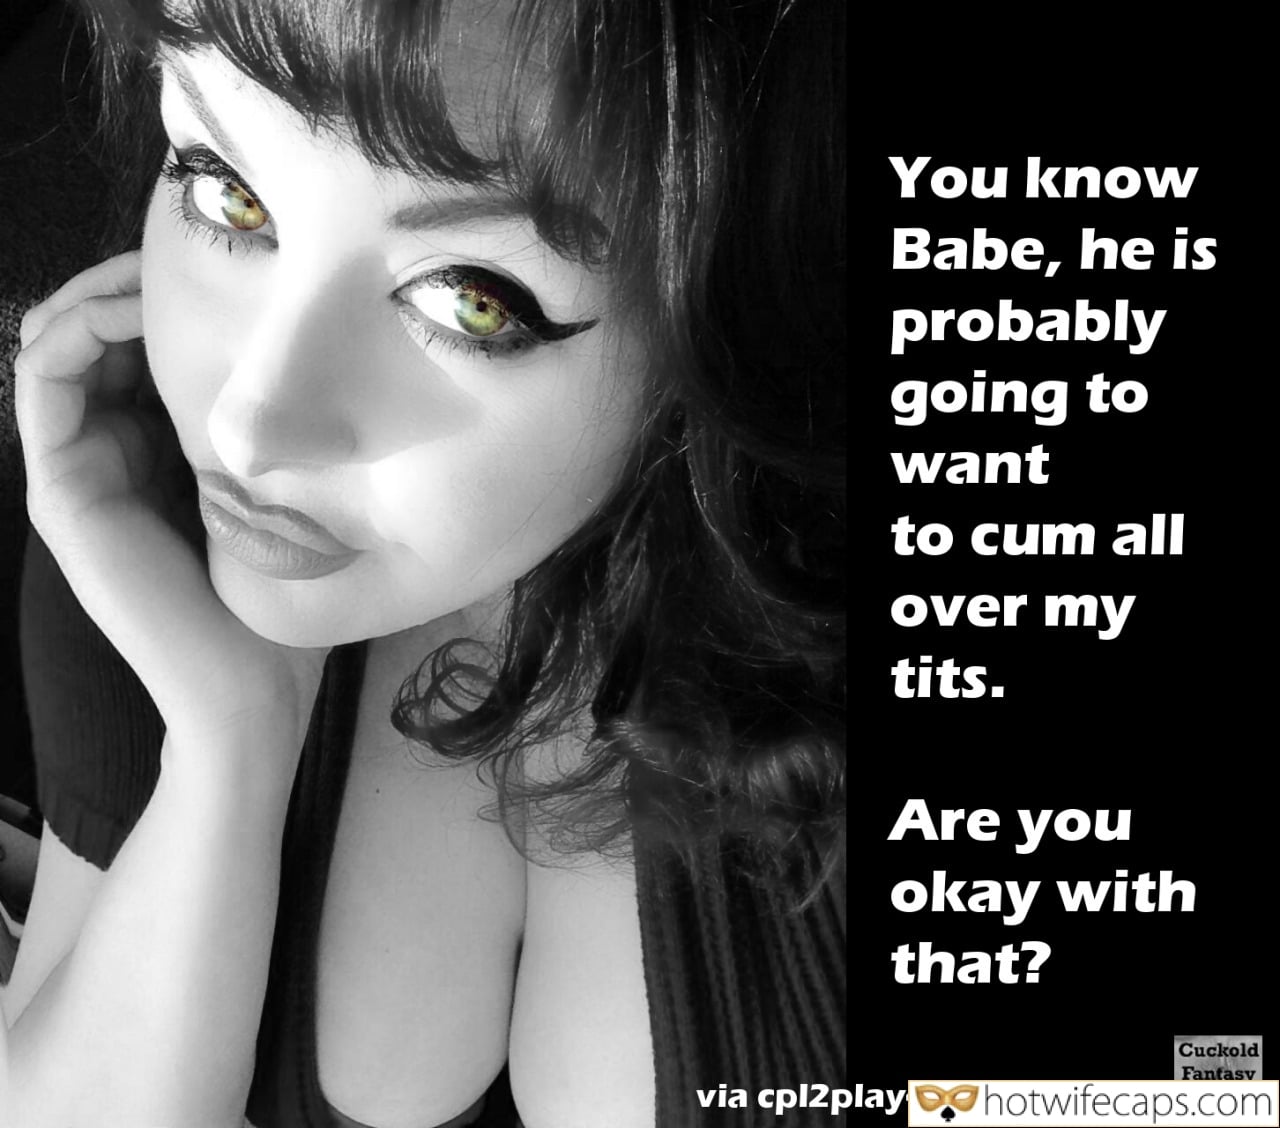 Tips Sexy Memes Cum Slut Cheating hotwife caption: You know Babe, he is probably going to want to cum all over my tits. Are you okay with that? Hw Makeup on Preparing to Go Out